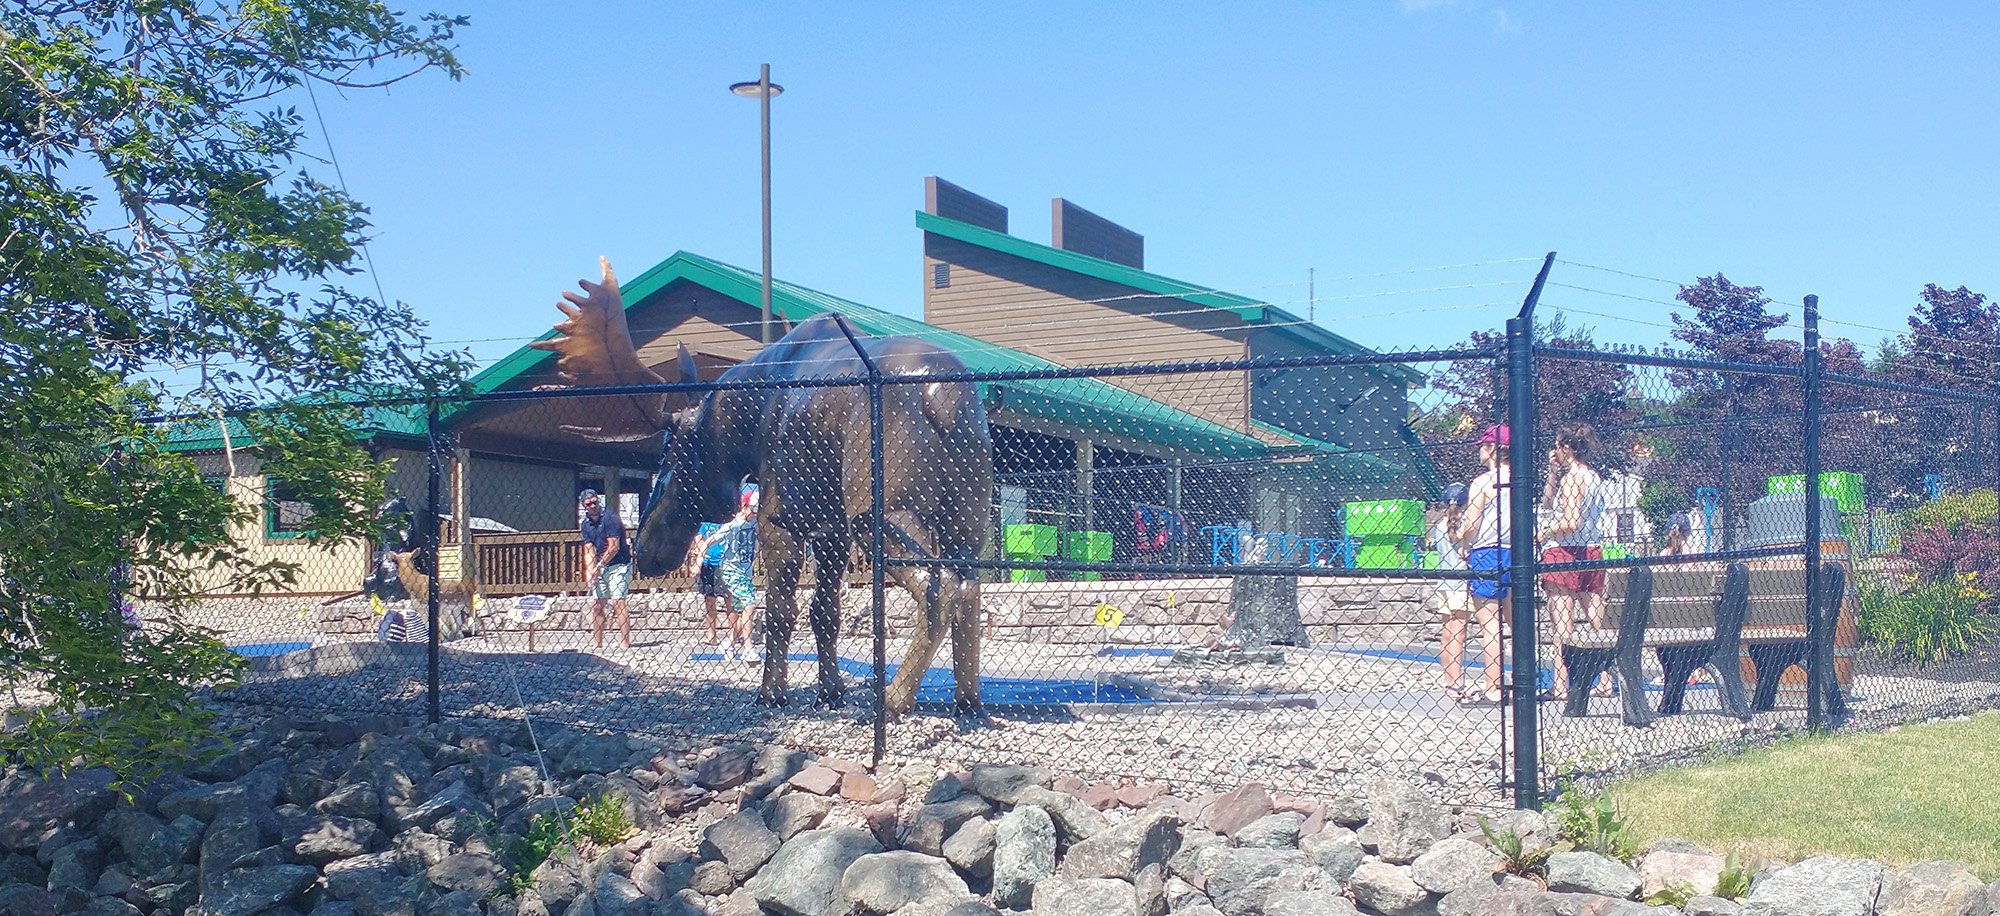 Plus mini golf, with a moose. I've seen so many more moose statues then actual moose so far in the last 2 1/2 months.